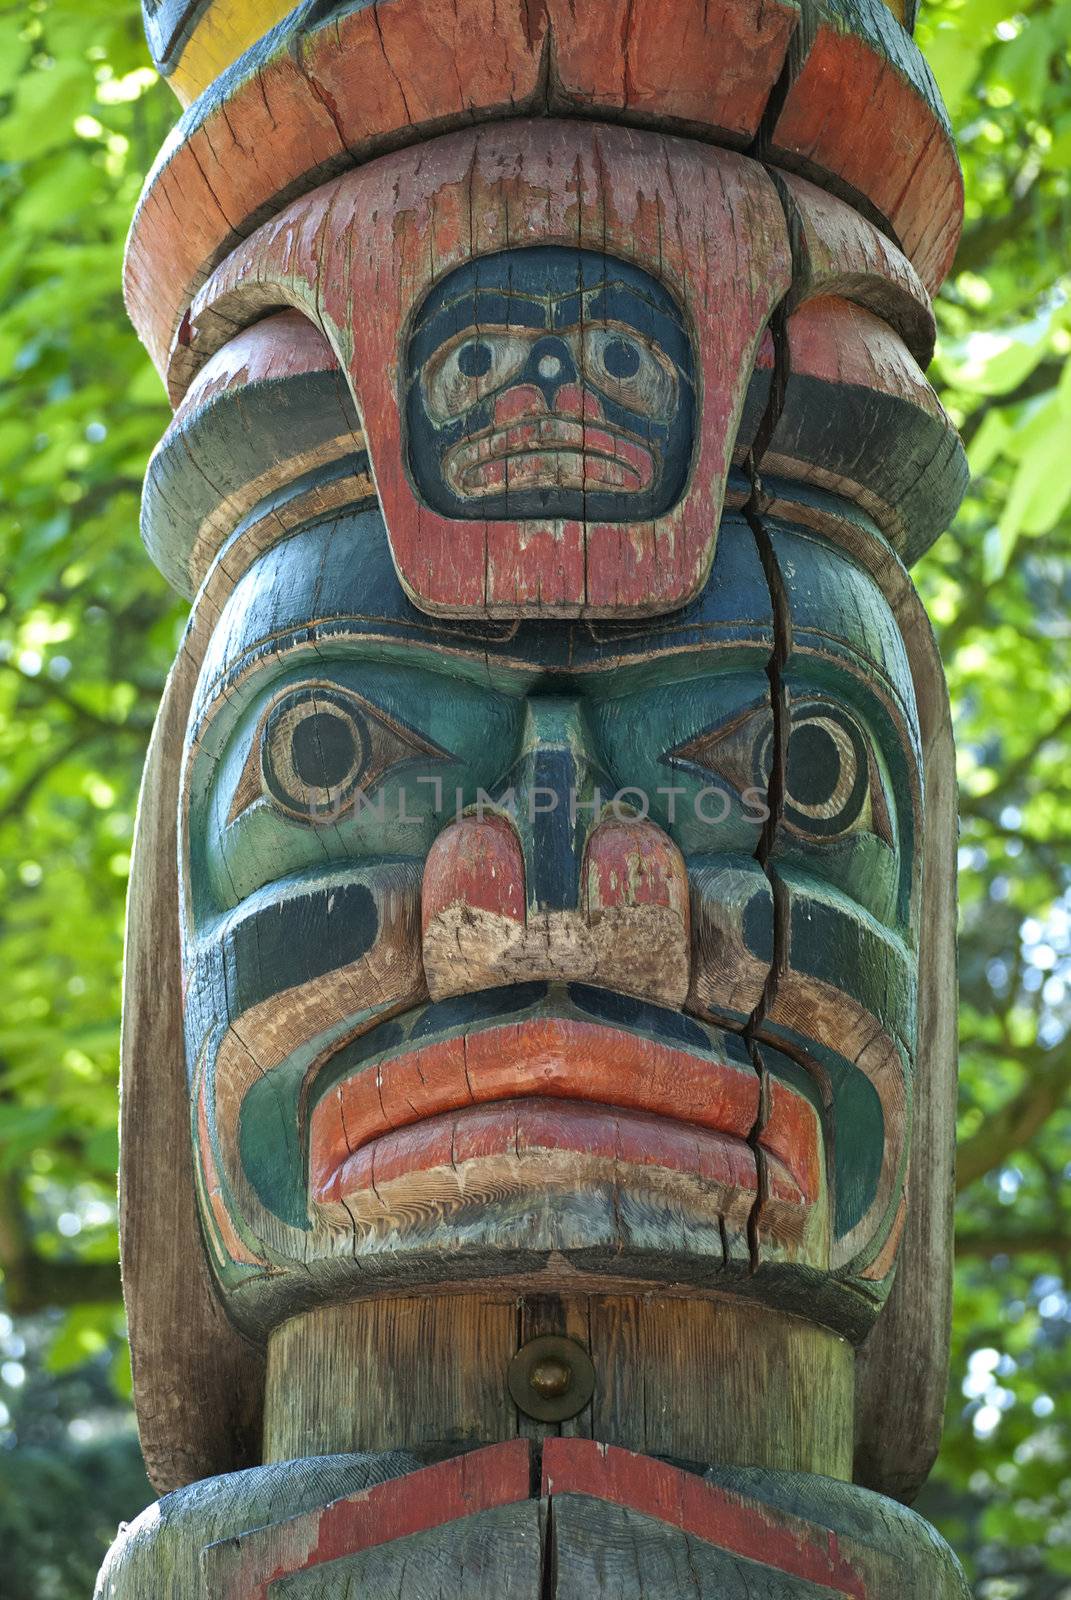 Wooden totem pole, monumental sculpture carved from large tree